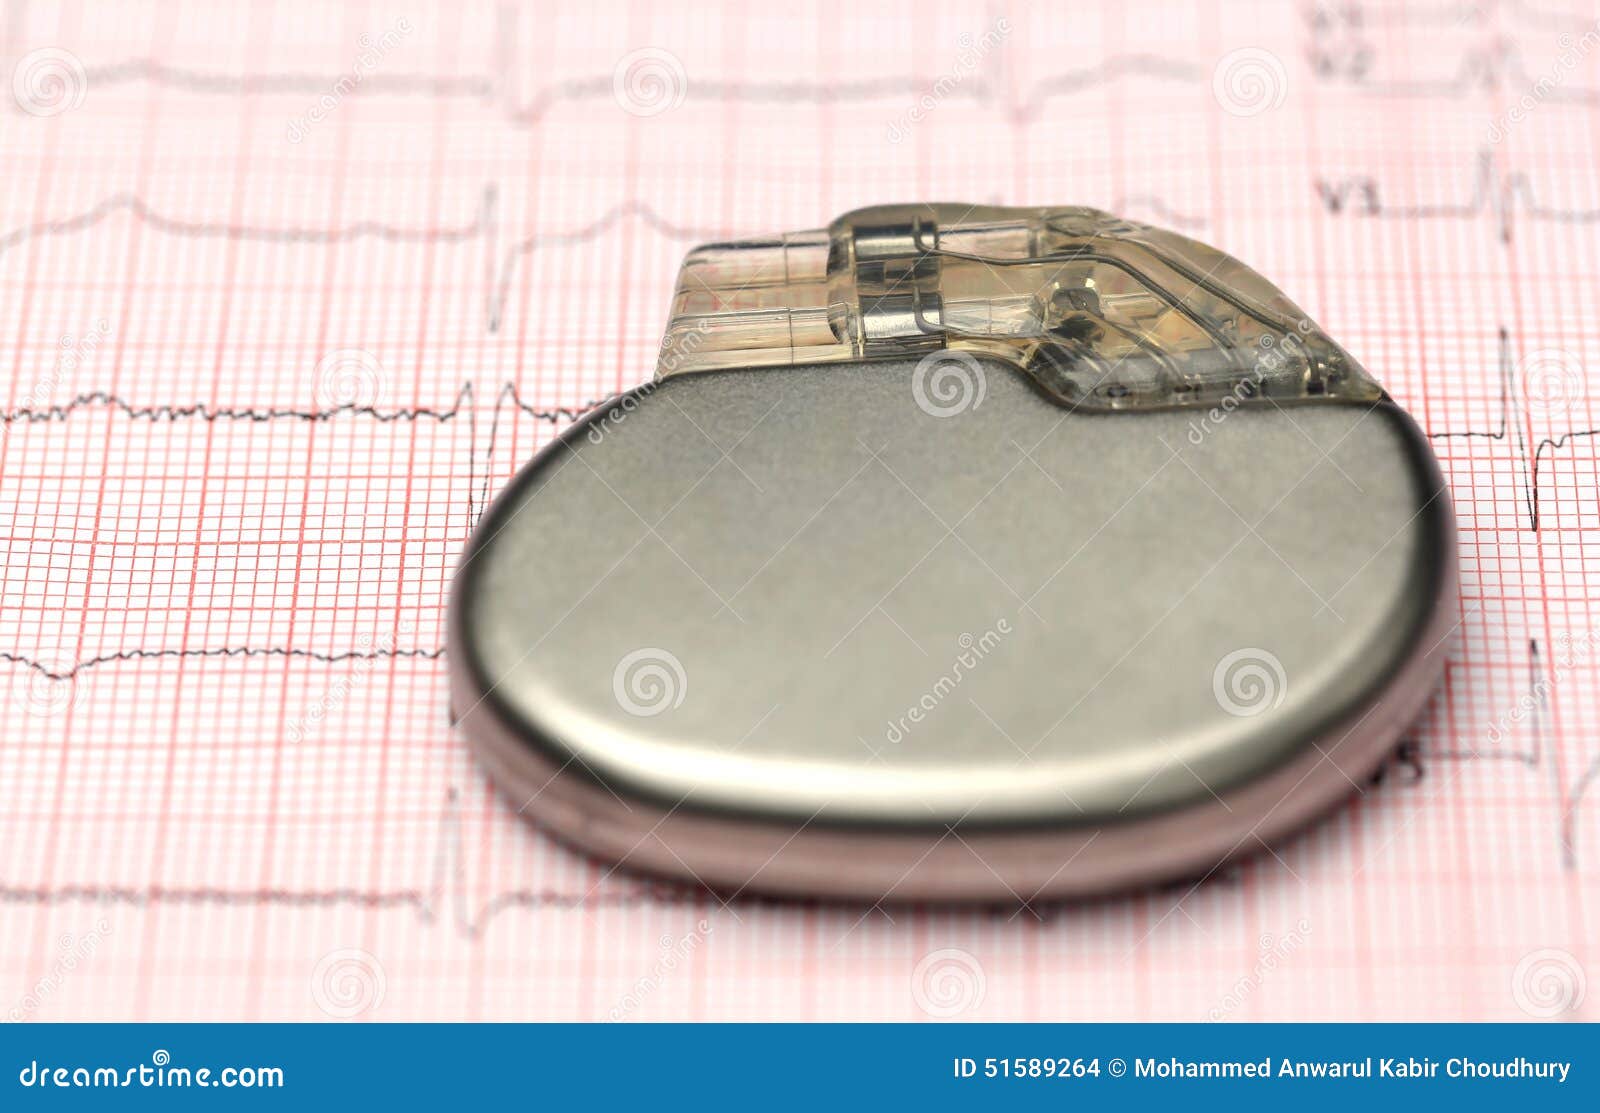 pacemaker on electrocardiograph